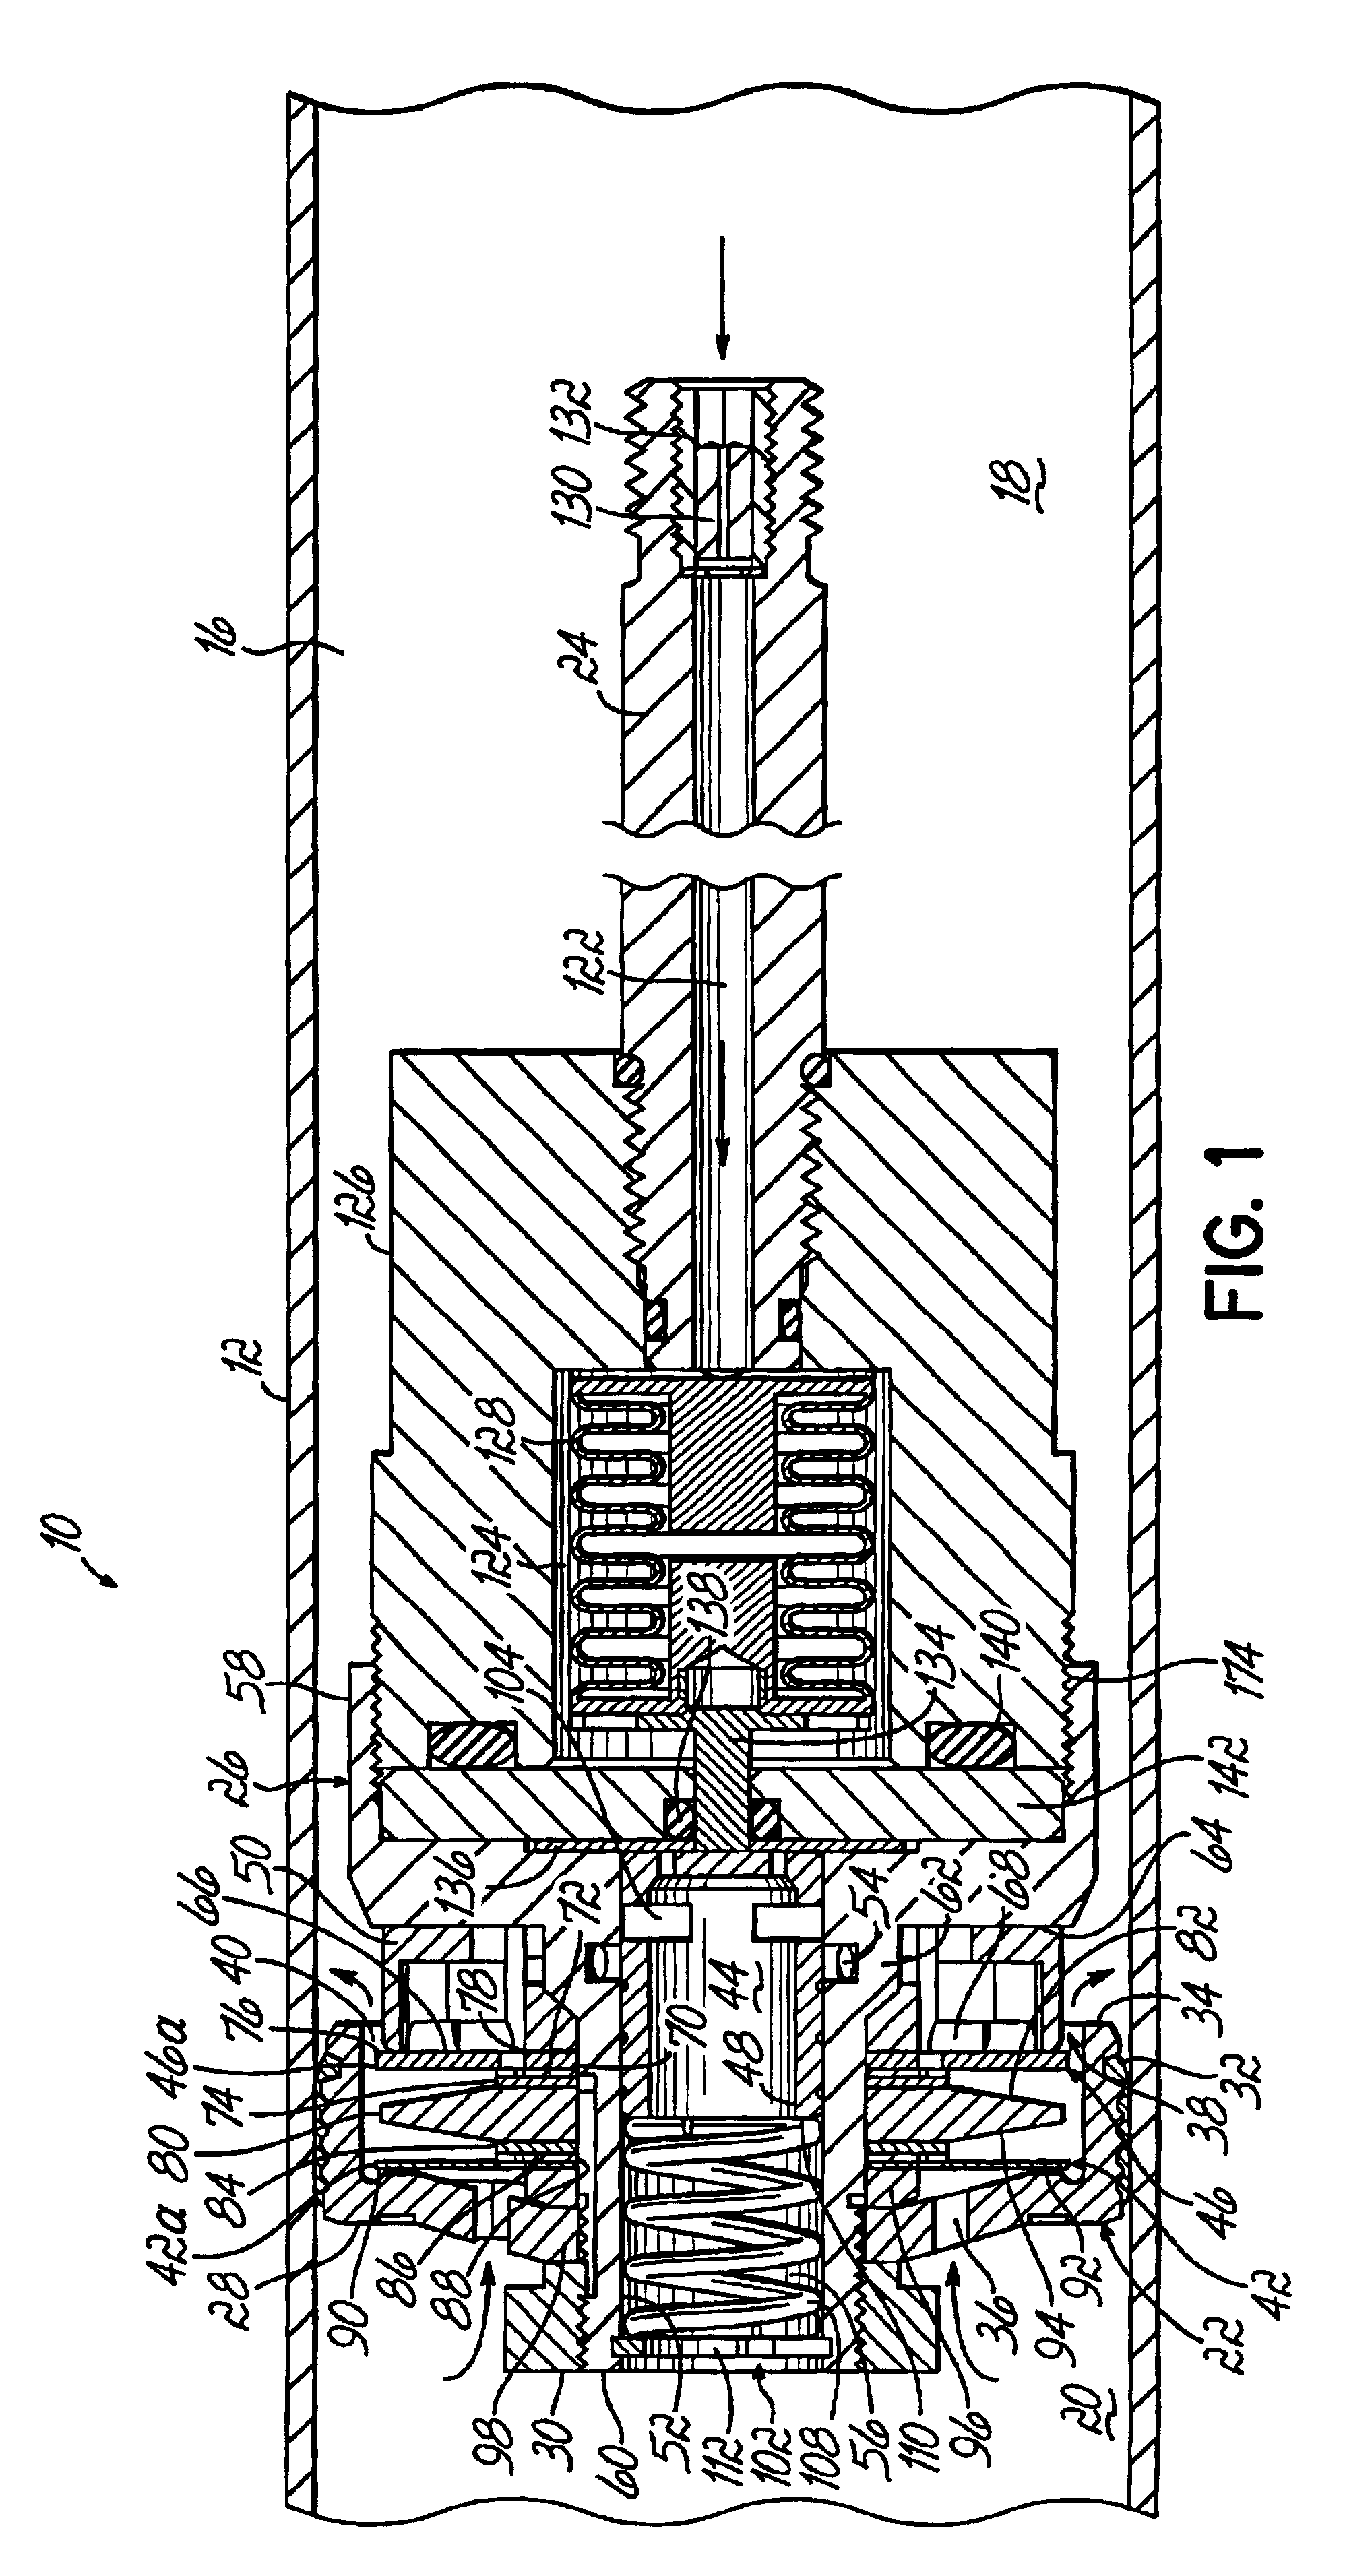 Piston and rod assembly for air-actuated variable damping